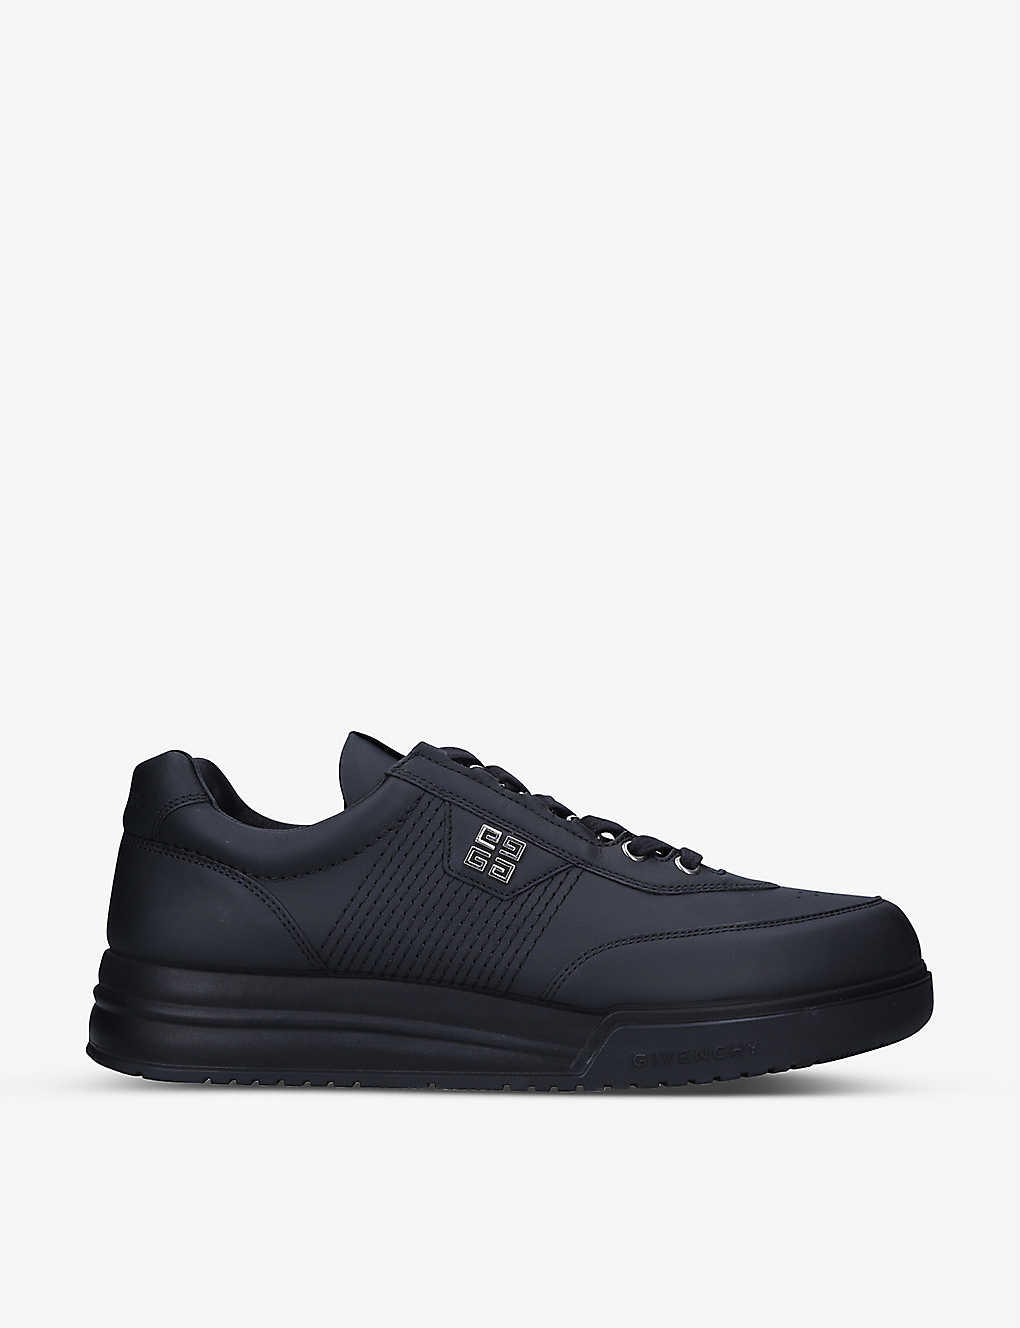 Givenchy Men's Black G4 Brand-plaque Leather Low-top Trainers